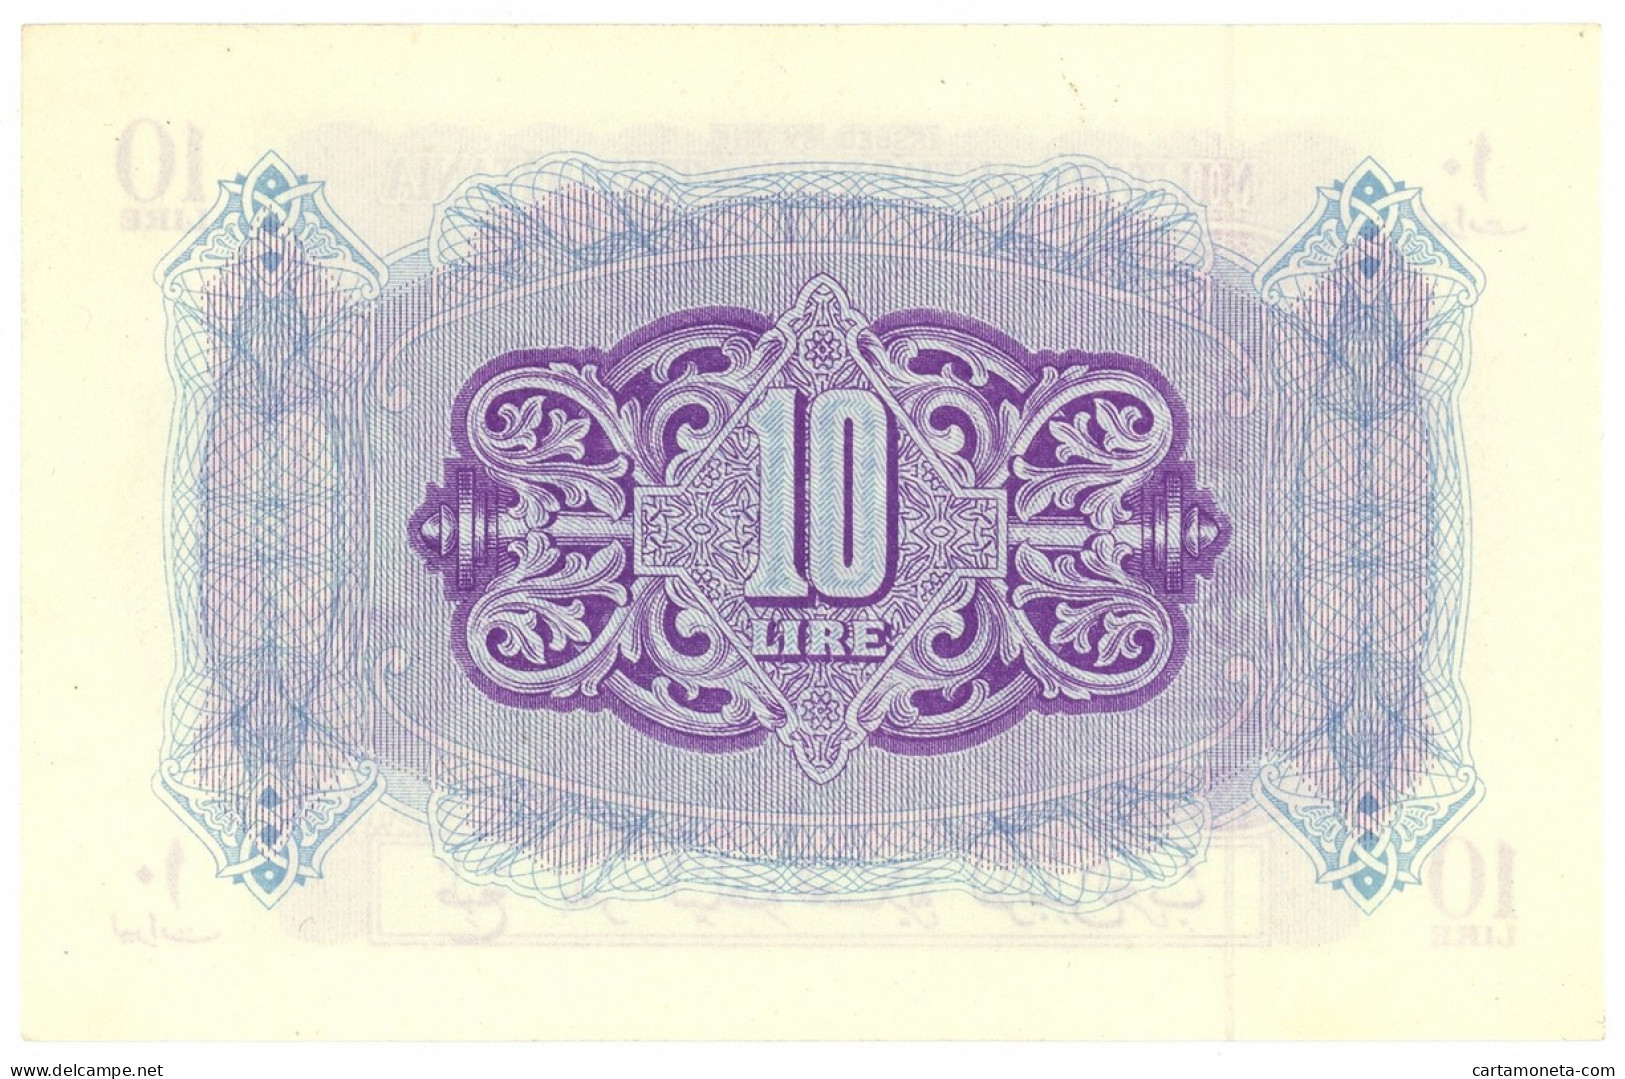 10 LIRE OCCUPAZIONE INGLESE TRIPOLITANIA MILITARY AUTHORITY 1943 QFDS - Occupation Alliés Seconde Guerre Mondiale